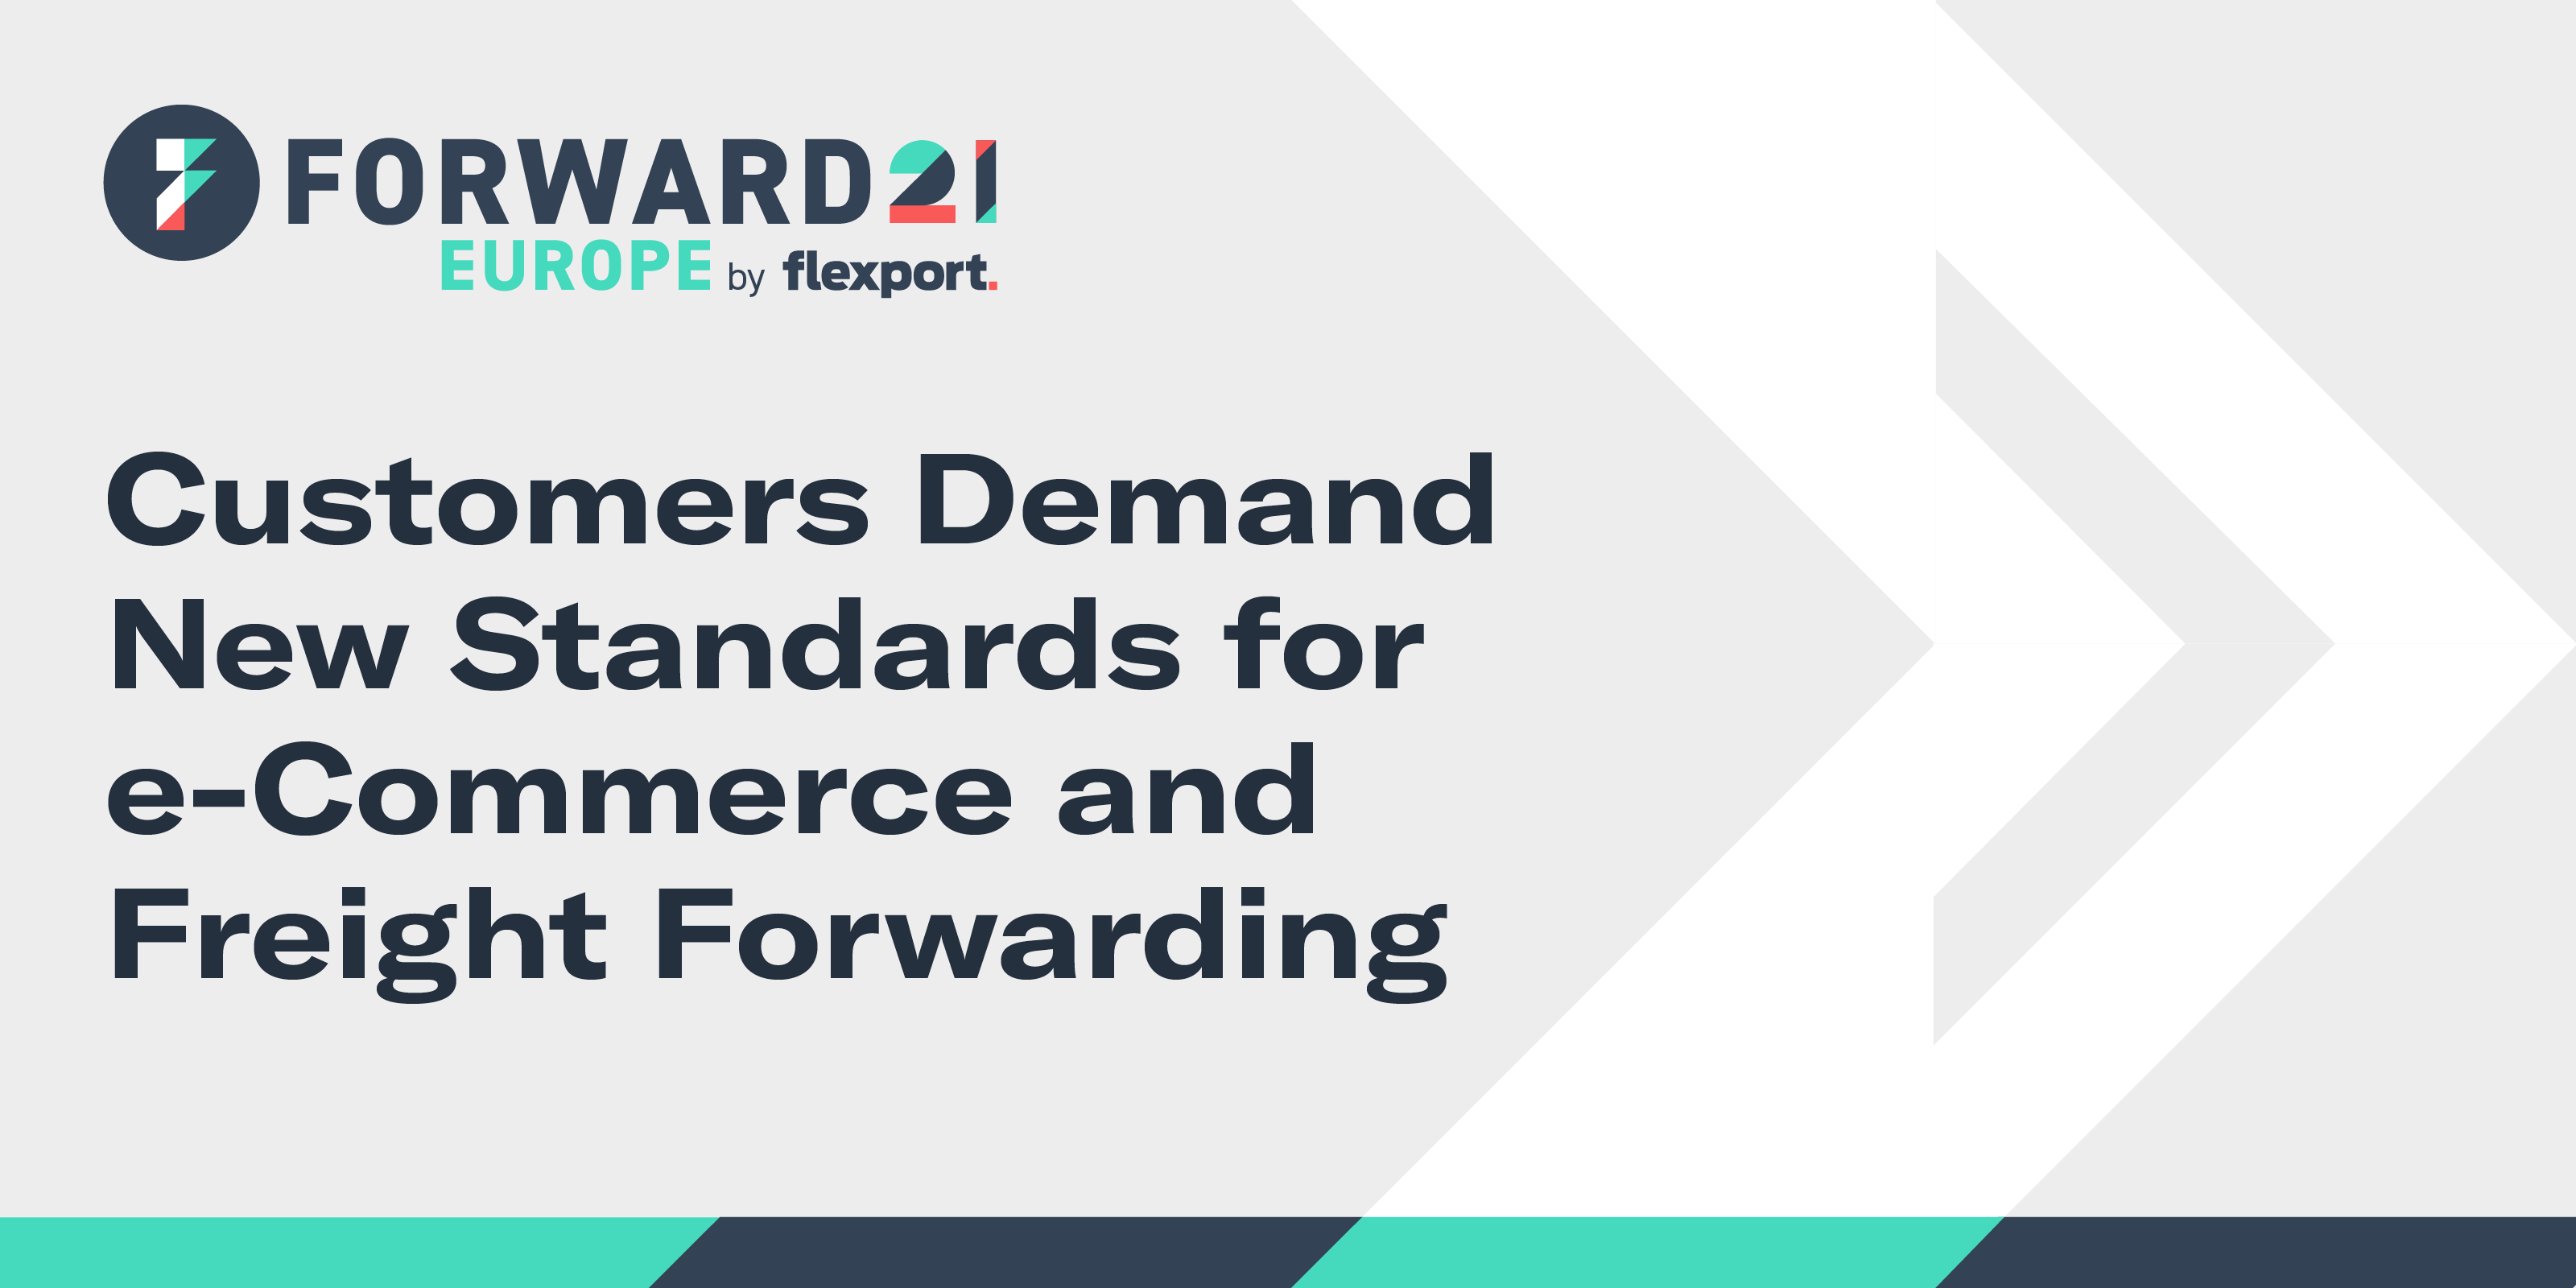 FWD21 Europe - Customers Demand New Standards for e-Commerce and Freight Forwarding